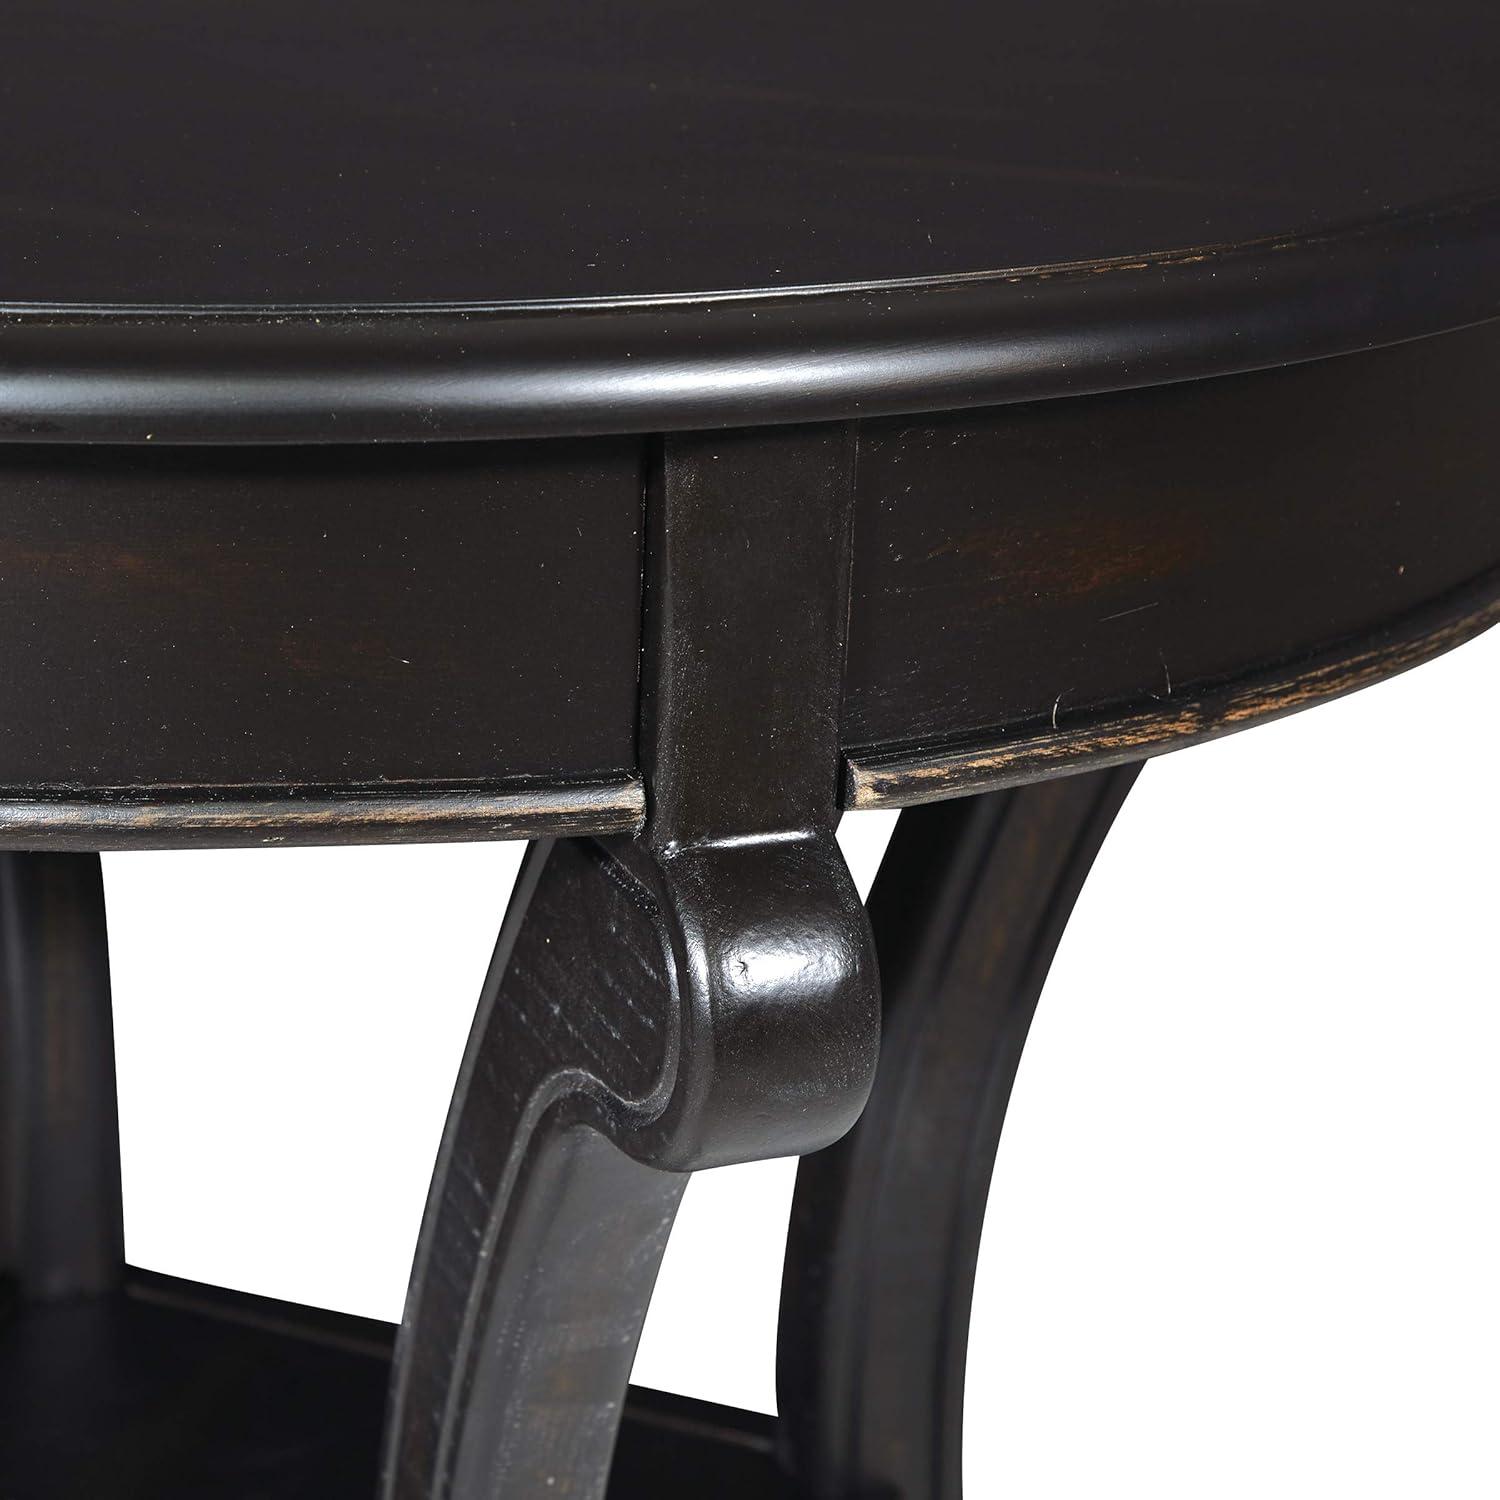 Vermont Round Wood Accent Table in Antique Black